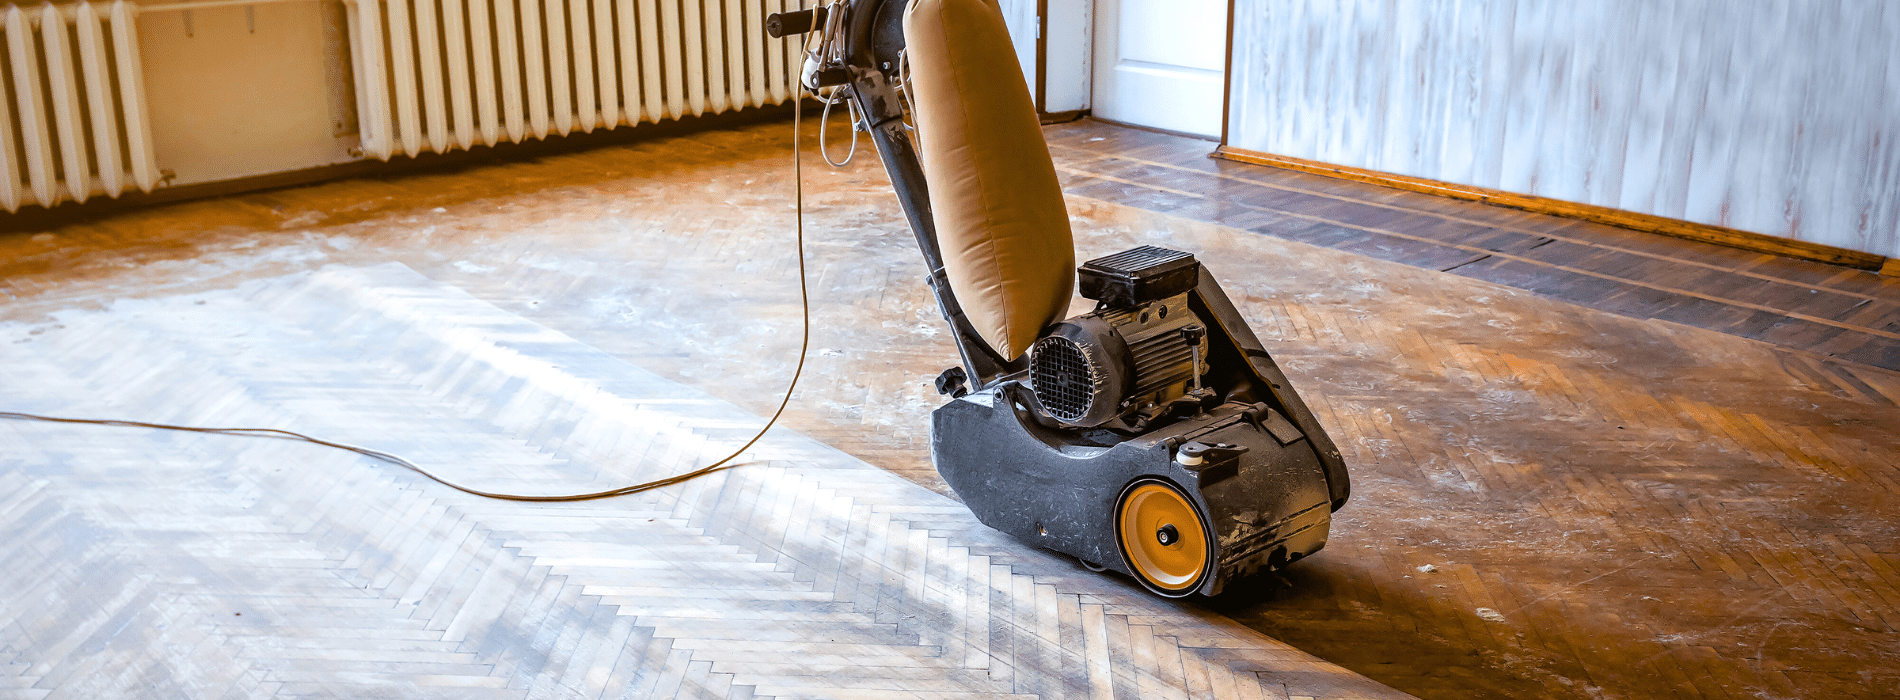 Experience the expertise of Mr Sander® as they skillfully sand a herringbone floor using a Voltage 230 Frequency 5060 Bona belt sander. With a dust extraction system and HEPA filter, they ensure a clean and efficient result. Trust the professionals for exceptional floor sanding services. Contact us today!